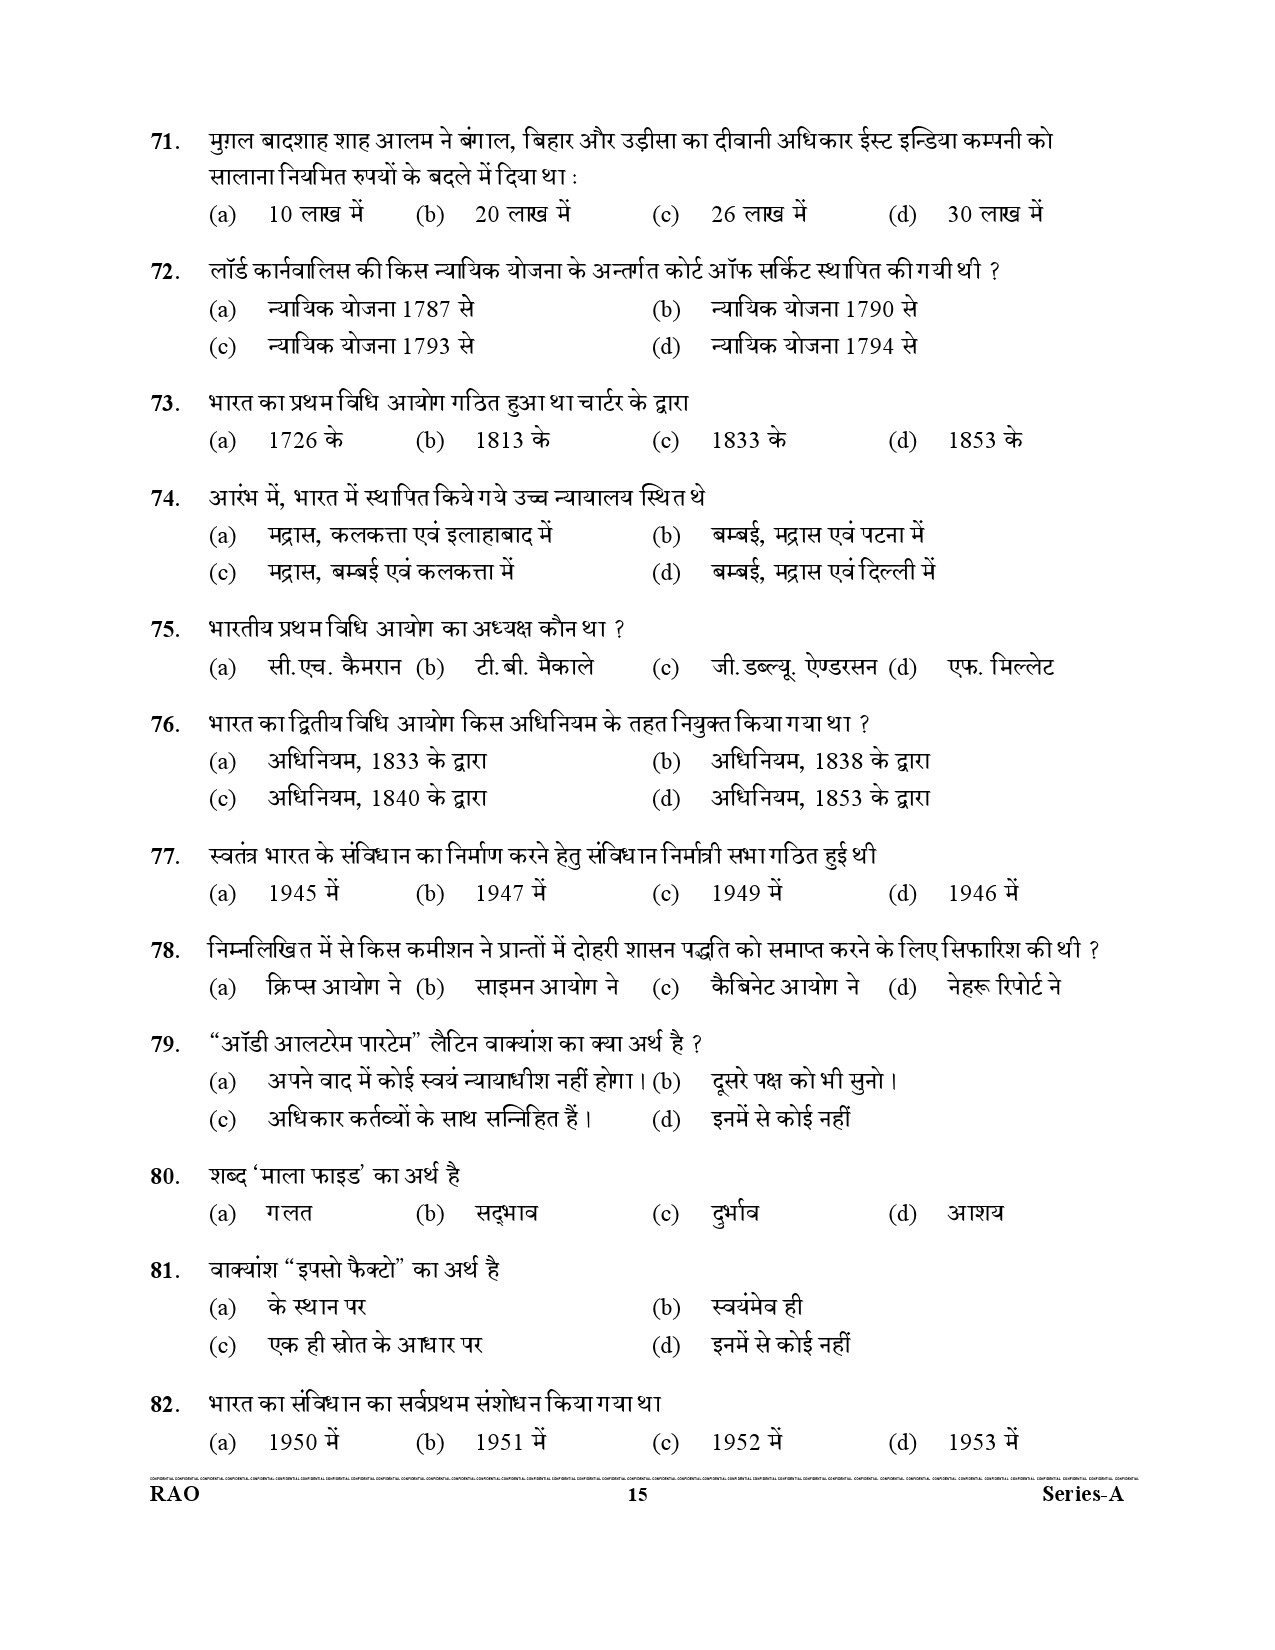 Advocate General Office Review Officer General Knowledge Preliminary 2021 15